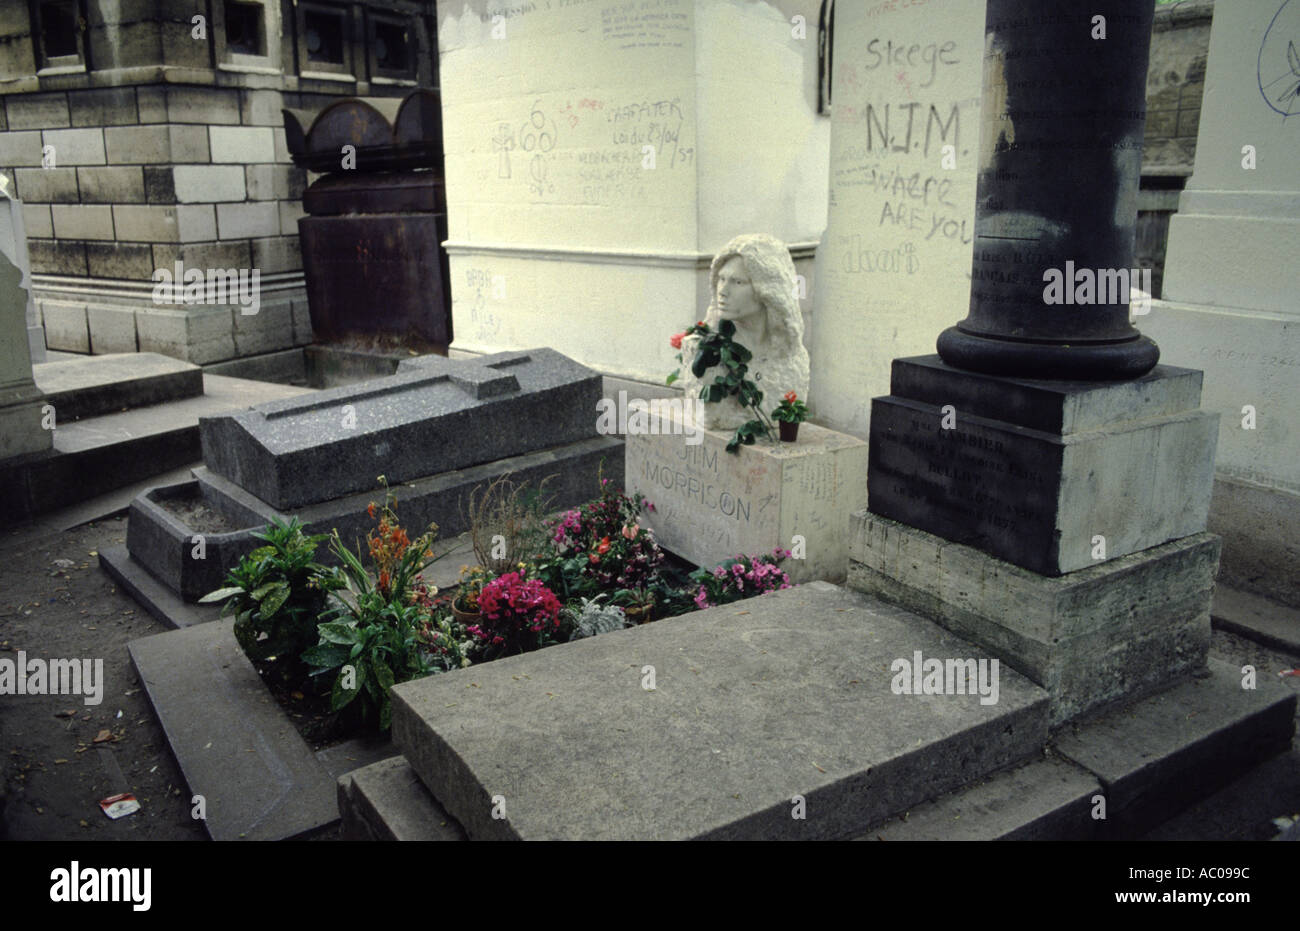 The grave of Jim Morrison from the Doors at Pere Lachaise Cemetery Paris France Stock Photo